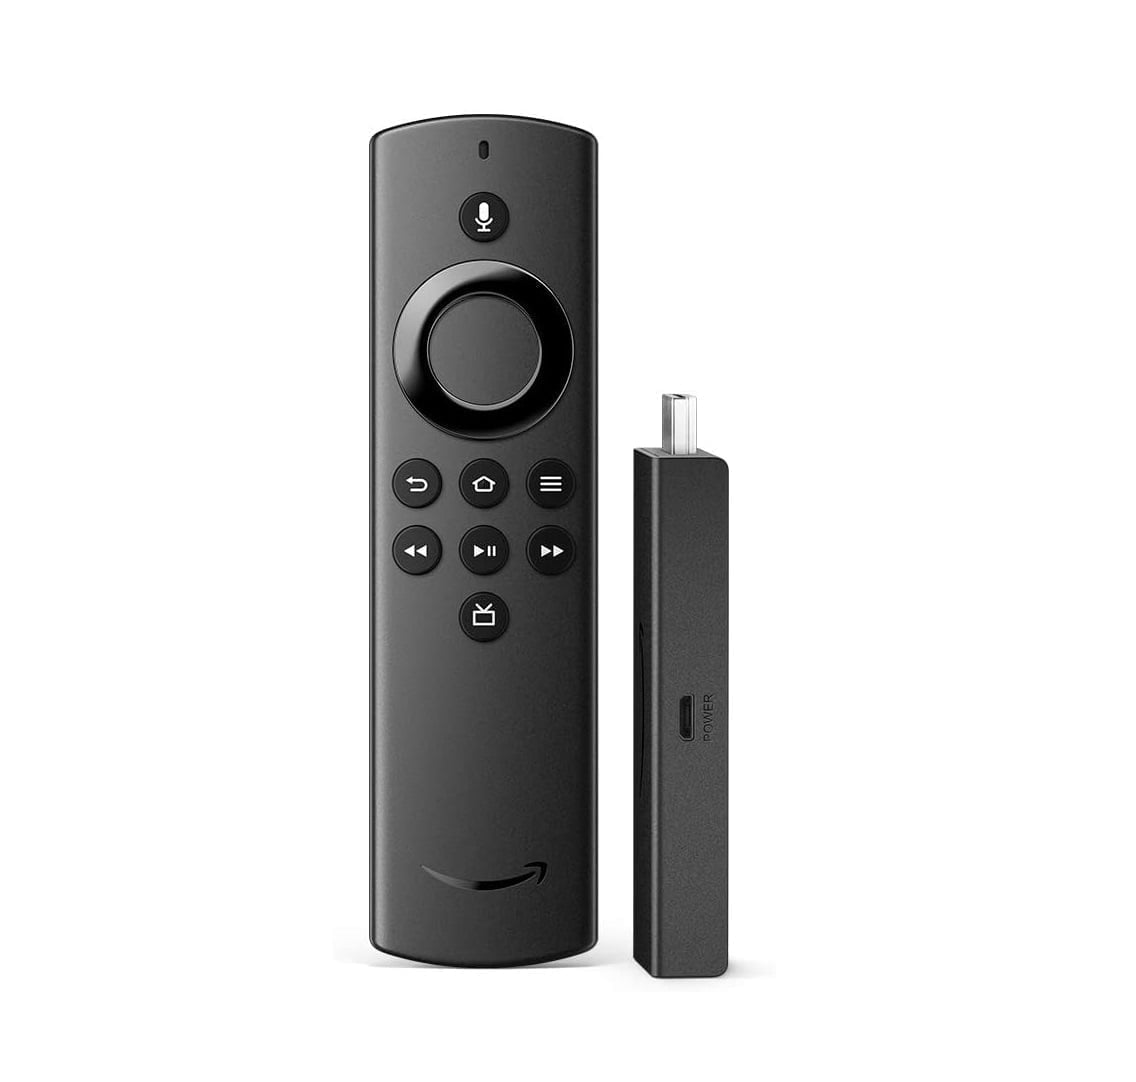 51Da2Zftfl. Ac Sl1000 Amazon &Lt;Ul&Gt; &Lt;Li&Gt;The Most Affordable Fire Tv Stick - Enjoy Fast Streaming In Full Hd. Comes With Alexa Voice Remote Lite.&Lt;/Li&Gt; &Lt;Li&Gt;Press And Ask Alexa - Use Your Voice To Easily Search And Launch Shows Across Multiple Apps.&Lt;/Li&Gt; &Lt;Li&Gt;Tens Of Thousands Of Channels, Alexa Skills, And Apps - Including Netflix, Youtube, Prime Video, Disney+, Apple Tv, And Hbo. Subscription Fees May Apply.&Lt;/Li&Gt; &Lt;Li&Gt;500,000+ Movies And Tv Episodes - With Thousands Included In Your Prime Membership.&Lt;/Li&Gt; &Lt;Li&Gt;Live Tv - Watch Your Favorite Live Tv, News, And Sports With Subscriptions To Sling Tv, Youtube Tv, And Others.&Lt;/Li&Gt; &Lt;Li&Gt;Free Tv - Access Over 20,000 Free Movies And Tv Shows From Apps Like Imdb Tv, Tubi, Pluto Tv And More.&Lt;/Li&Gt; &Lt;Li&Gt;Listen To Music - Stream On Amazon Music, Spotify, Pandora, And Others. Subscription Fees May Apply.&Lt;/Li&Gt; &Lt;Li&Gt;Easy To Set Up, Stays Hidden - Plug In Behind Your Tv, Turn On The Tv, And Connect To The Internet To Get Set Up.&Lt;/Li&Gt; &Lt;Li&Gt;Food Network Kitchen Subscription - Live Q&Amp;A With Culinary Expert And More With A 1-Year Complimentary Subscription.&Lt;/Li&Gt; &Lt;Li&Gt;Certified For Humans: Struggle-Free, Tinker-Free, And Stress-Free. No Patience Needed—It'S Actually Simple.&Lt;/Li&Gt; &Lt;/Ul&Gt; &Lt;H3&Gt;Included In The Box Fire Tv Stick Lite, Alexa Voice Remote Lite, Usb Cable And Power Adapter, Hdmi Extender, 2 Aaa Batteries,&Lt;/H3&Gt; &Lt;Ul&Gt; &Lt;Li&Gt;The Included Alexa Voice Remote Lite Does Not Have Tv Controls And Will Not Control Power And Volume On Your Tv, Soundbar, Or Receiver. If These Features Interest You, We Recommend Fire Tv Stick, Which Comes With Alexa Voice Remote With Tv Controls.&Lt;/Li&Gt; &Lt;/Ul&Gt; Fire Tv Stick Lite Fire Tv Stick Lite With Alexa Voice Remote Lite | Hd Streaming Device | 2020 Release